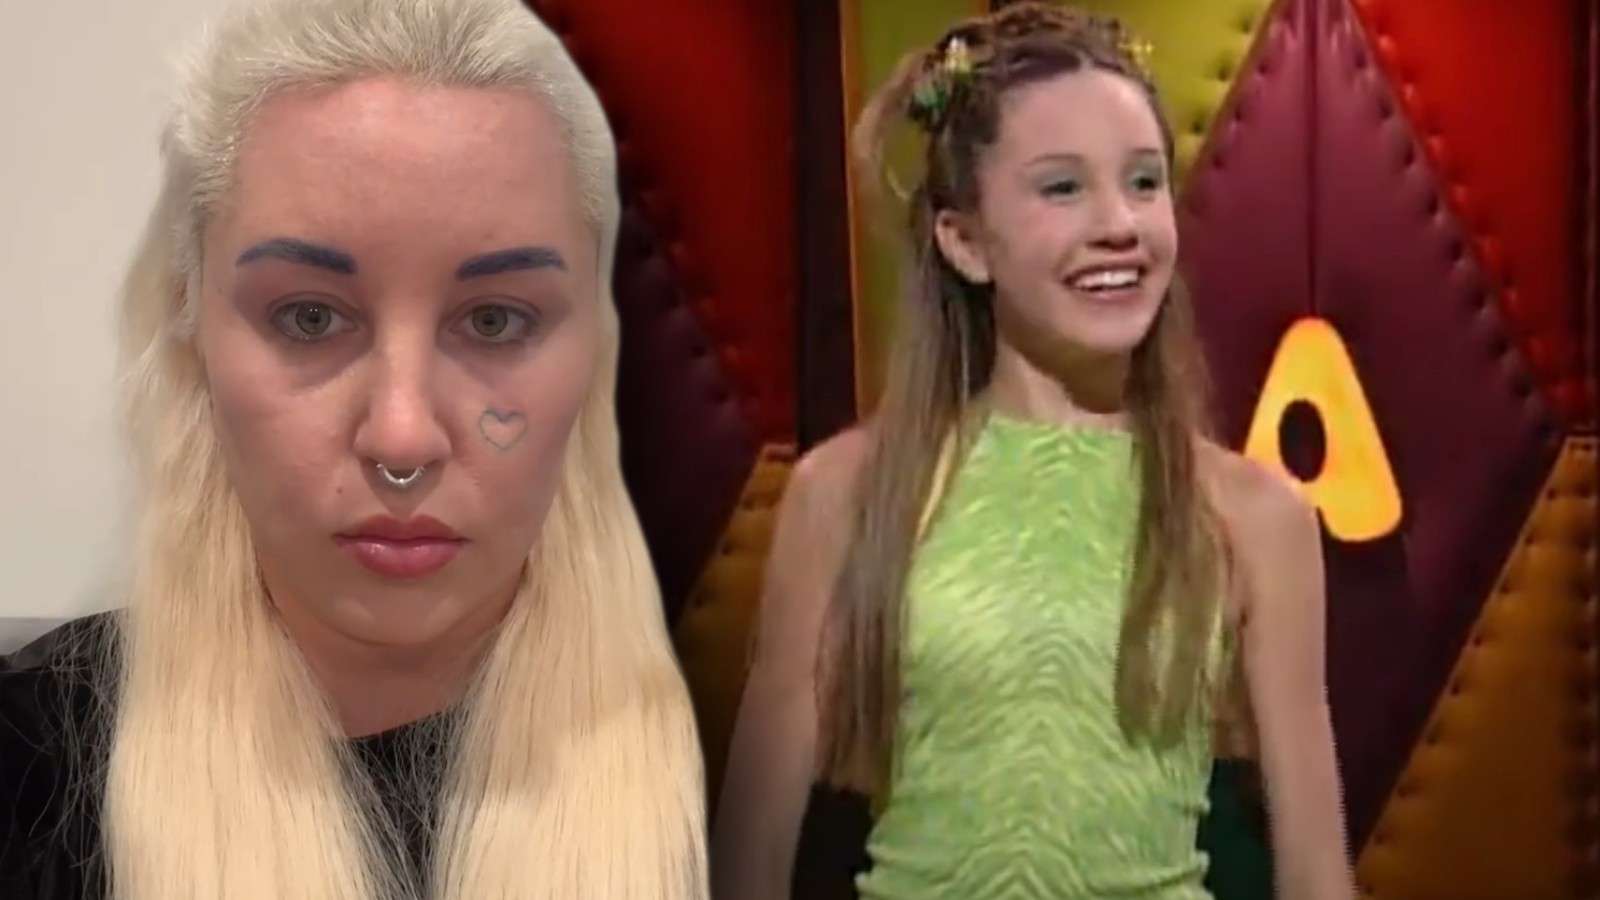 Image of Amanda Bynes now and in the Amanda Show